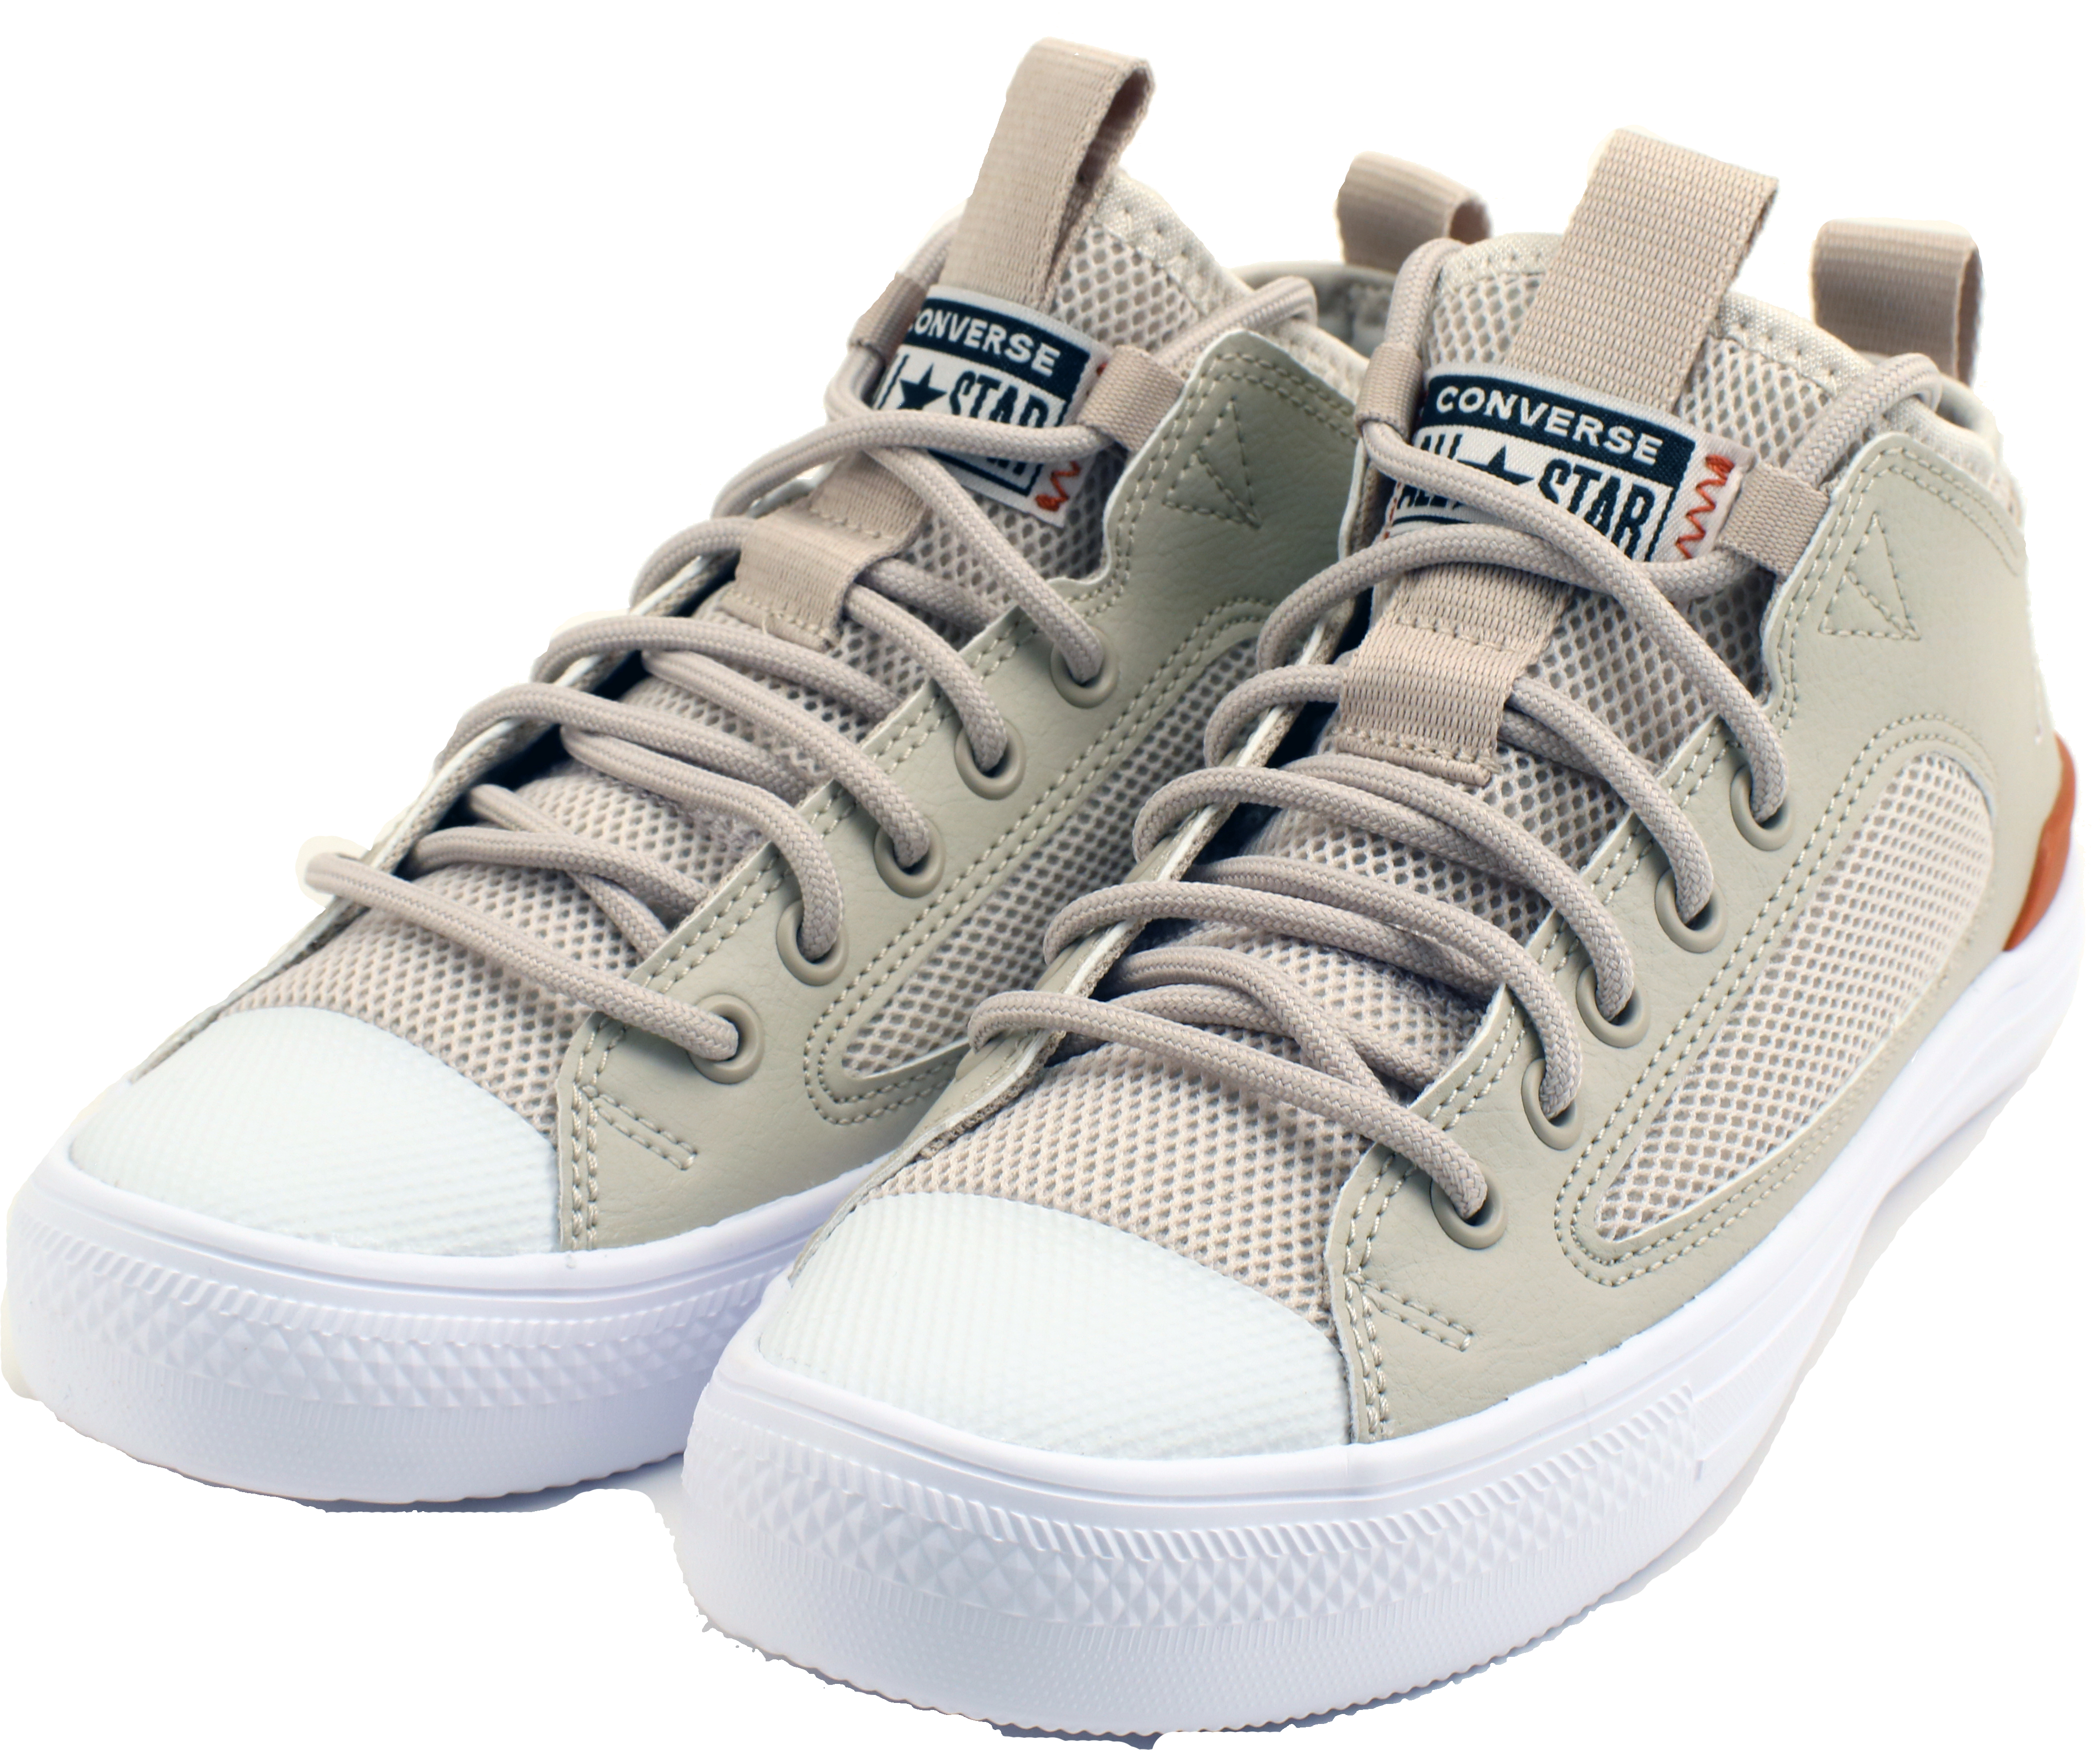 Converse Chuck Taylor All Star Ultra Lightweight - String / Pale Putty / Red Bark Synthetics